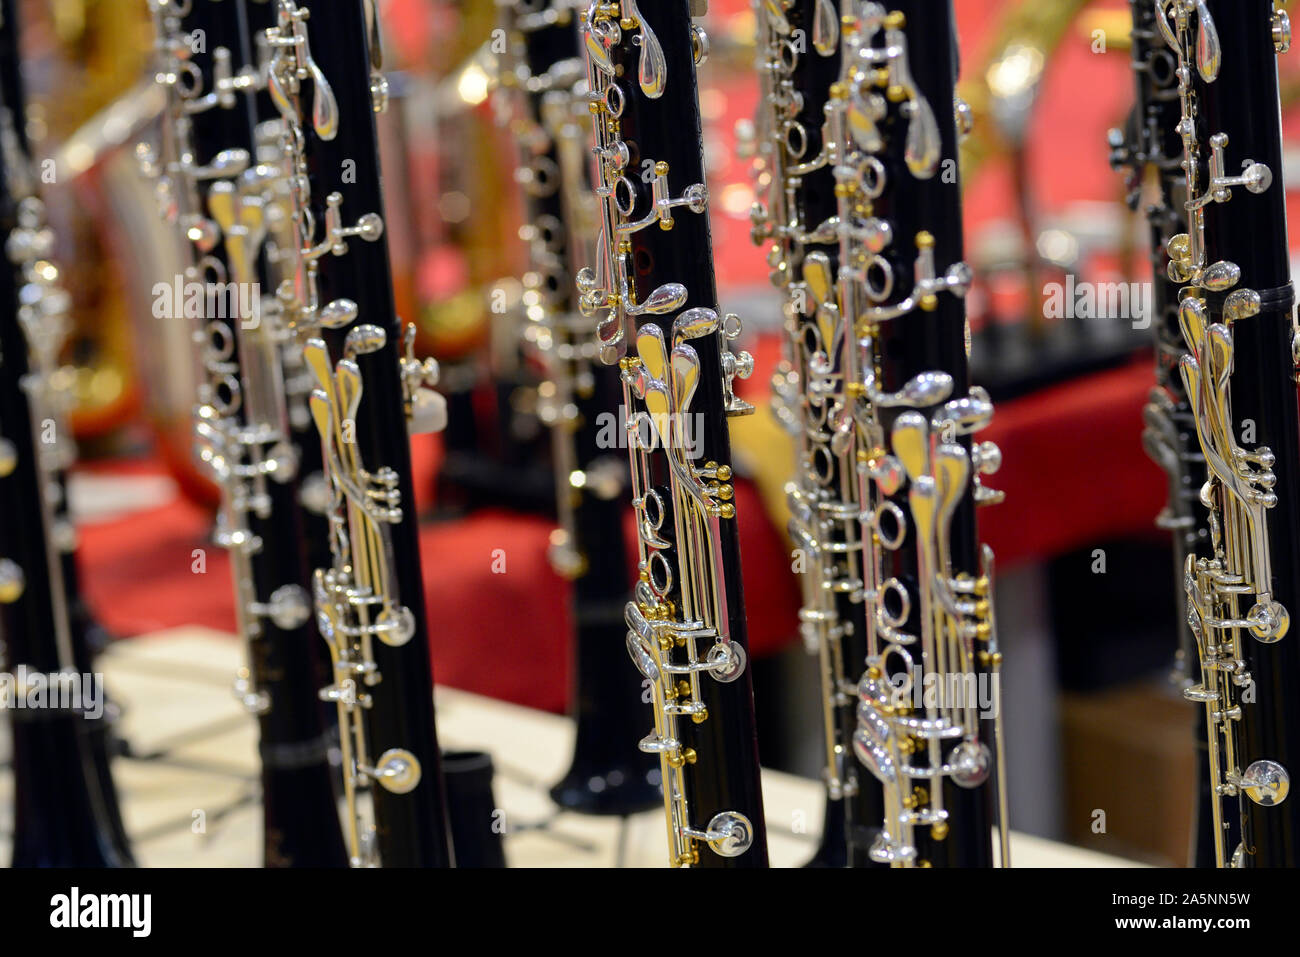 Italy, Lombardy, Cremona, Cremona Musica International Exhibitions and Festival 2019, Row of Clarinet Stock Photo